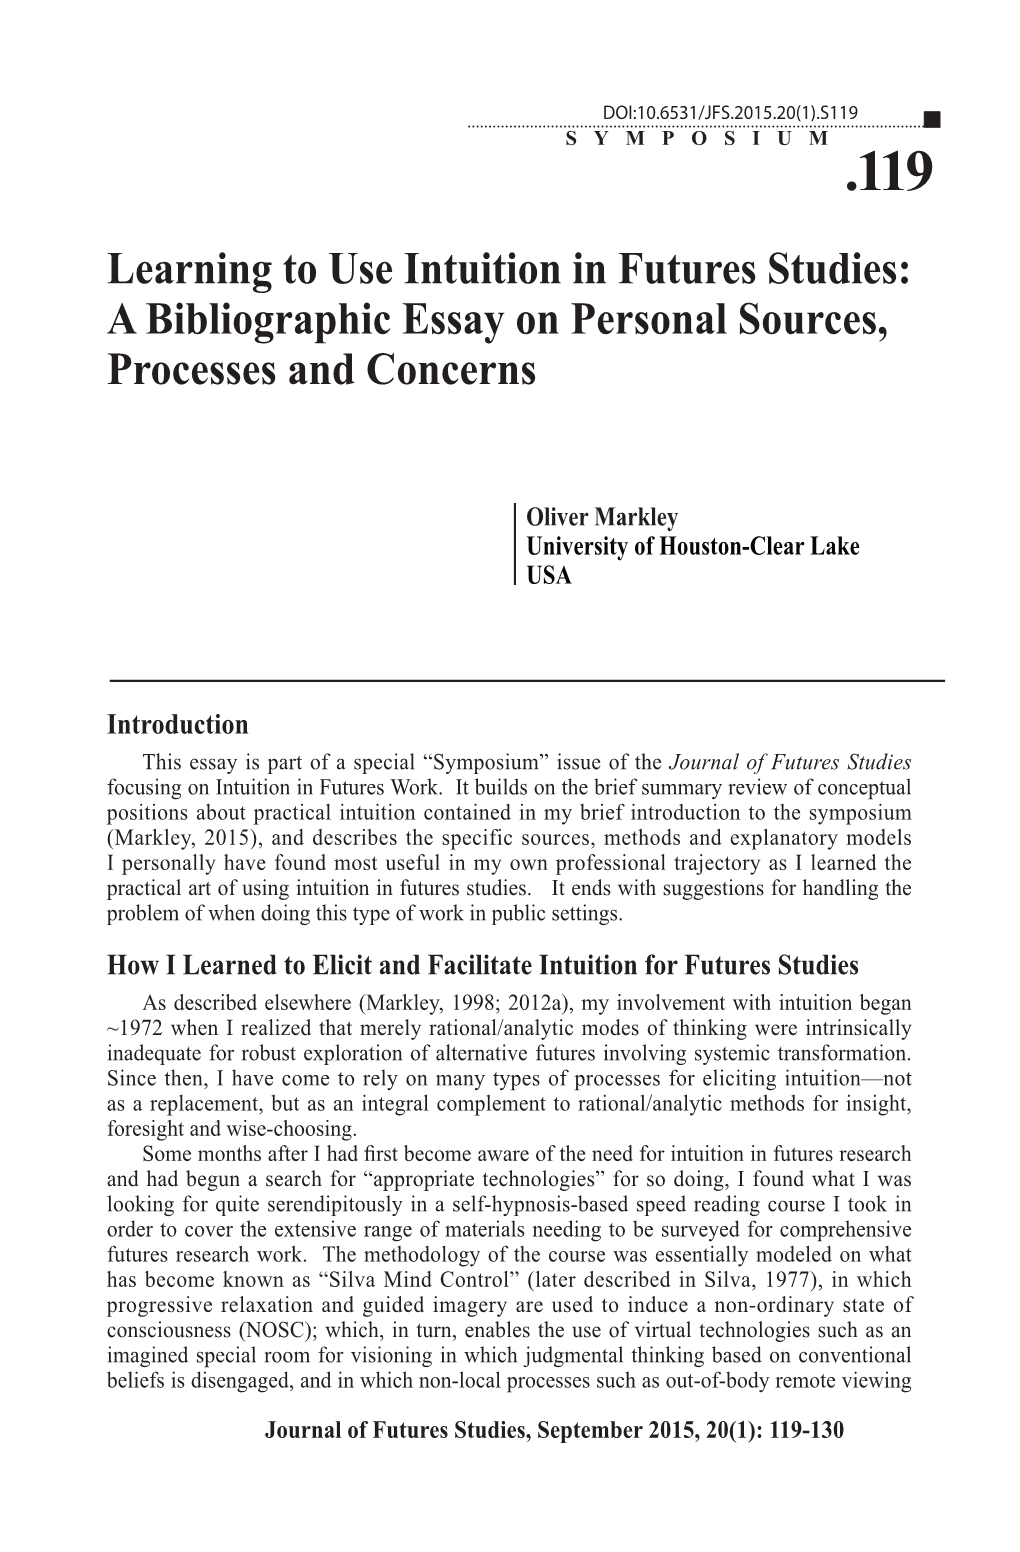 Learning to Use Intuition in Futures Studies: a Bibliographic Essay on Personal Sources, Processes and Concerns